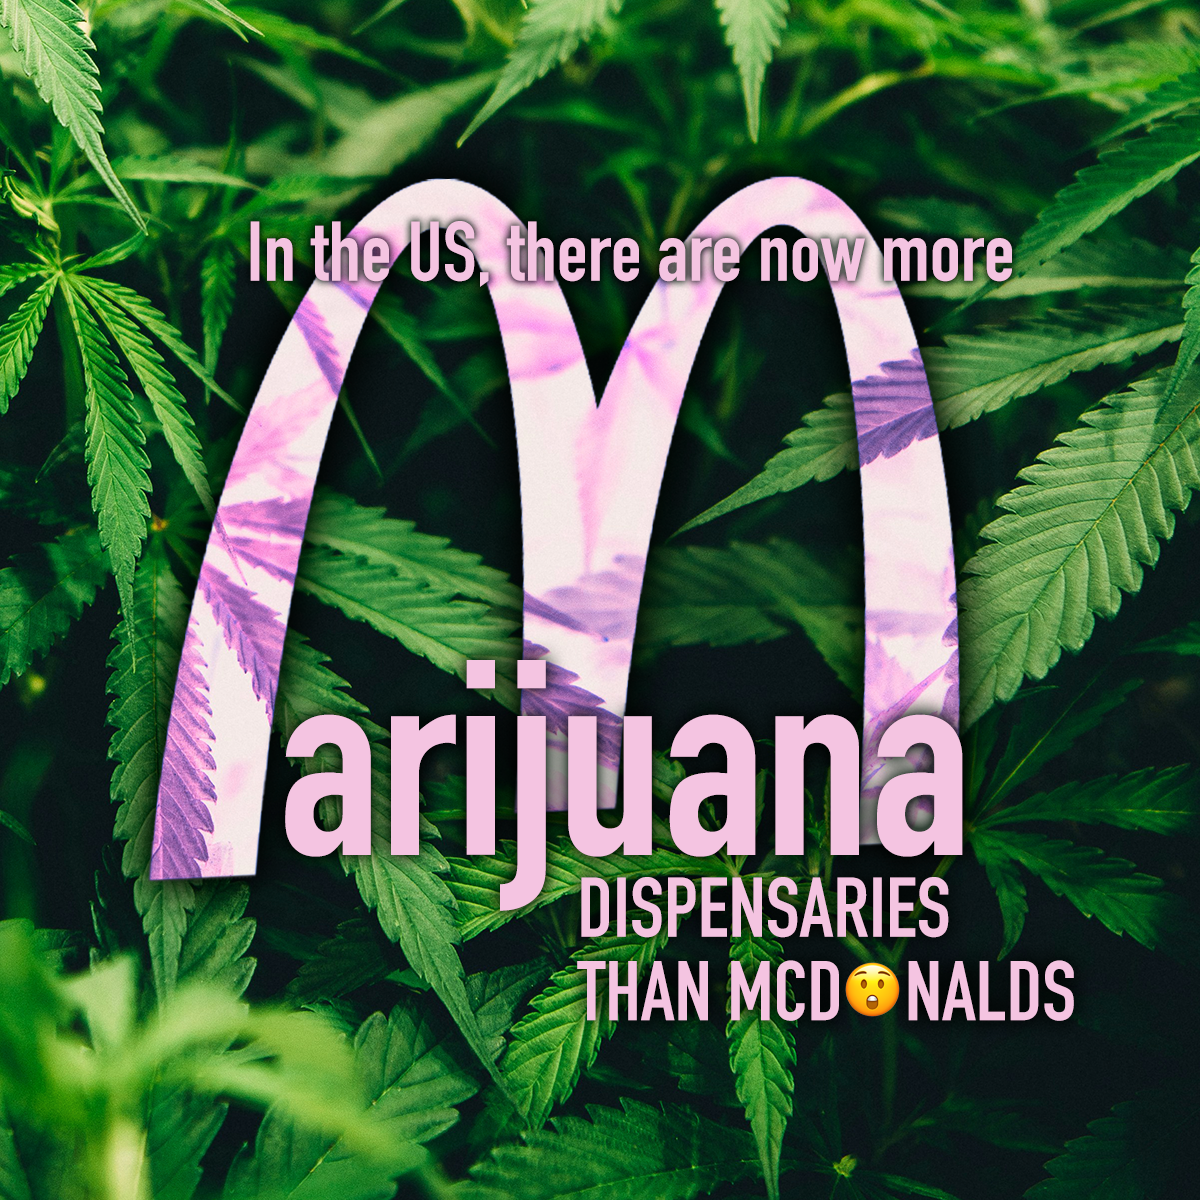 In the US there are now more cannabis dispensaries than McDonalds